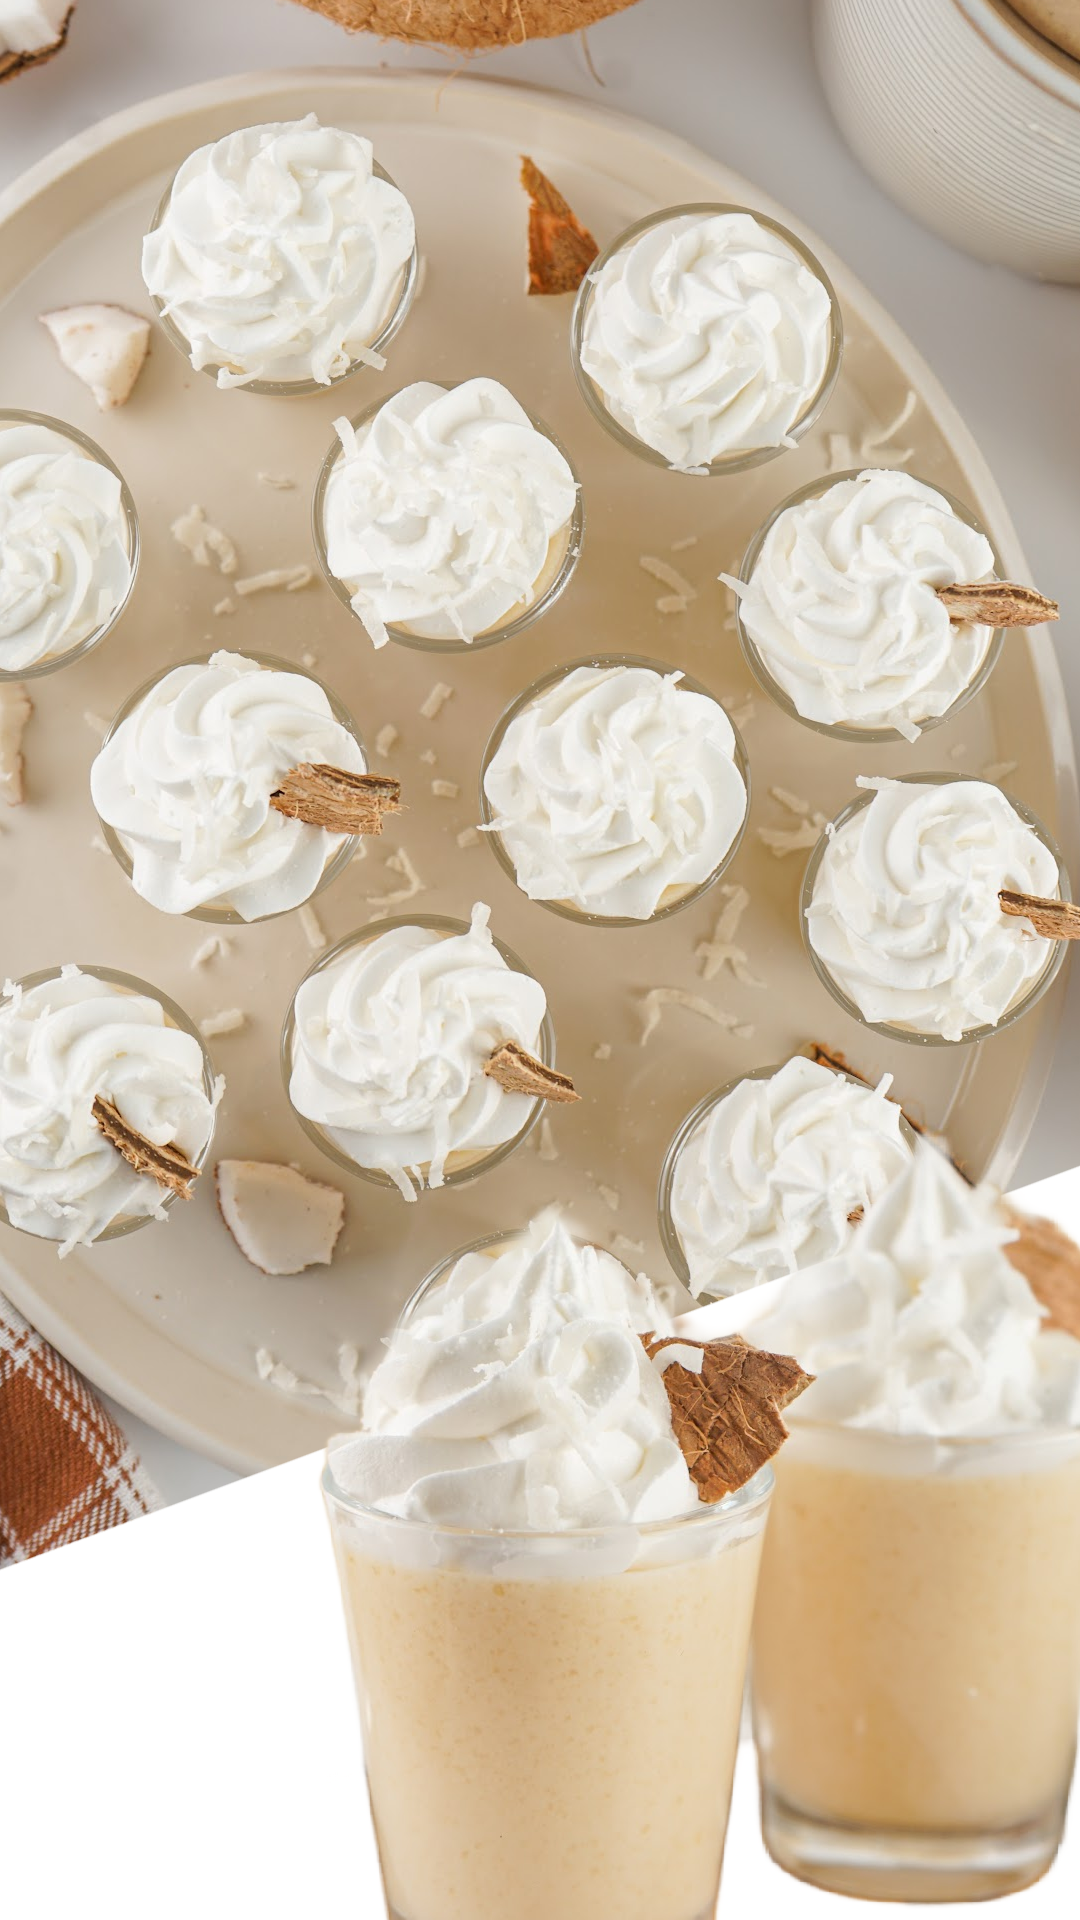 A tray of coconut jello shots with whipped cream from above. Two coconut shots are in the foreground. Garnish with shredded coconut.